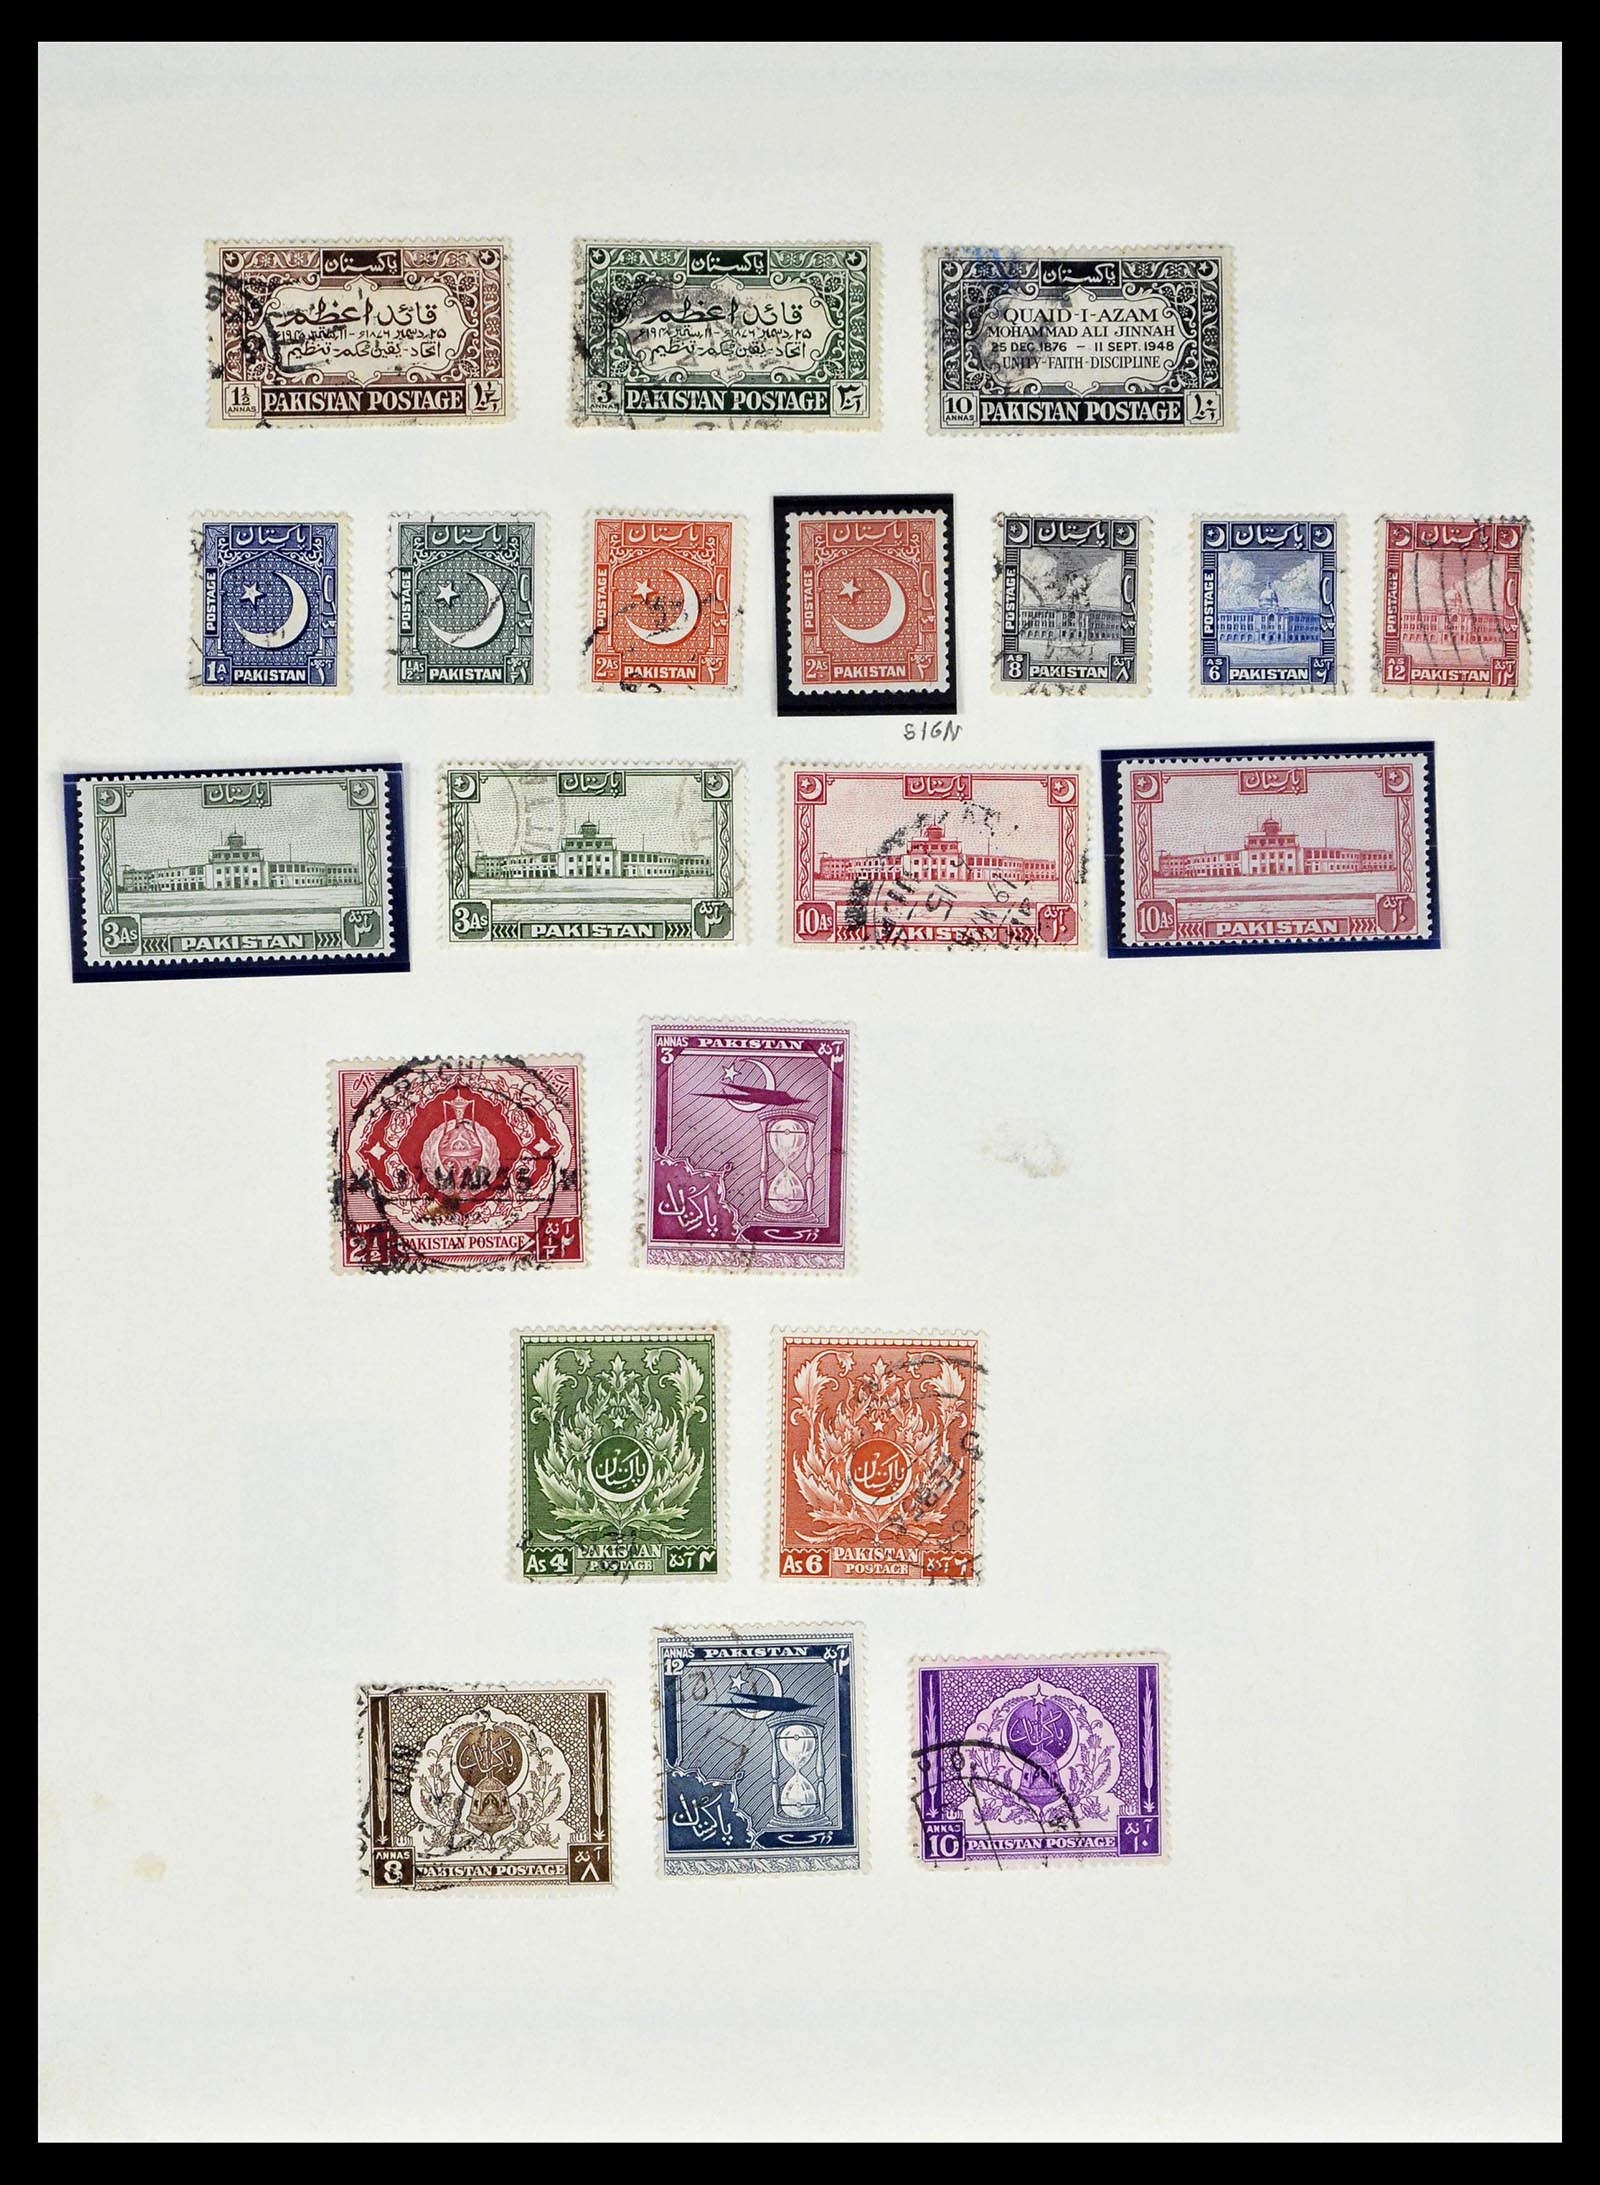 39177 0005 - Stamp collection 39177 Pakistan 1947-1980.